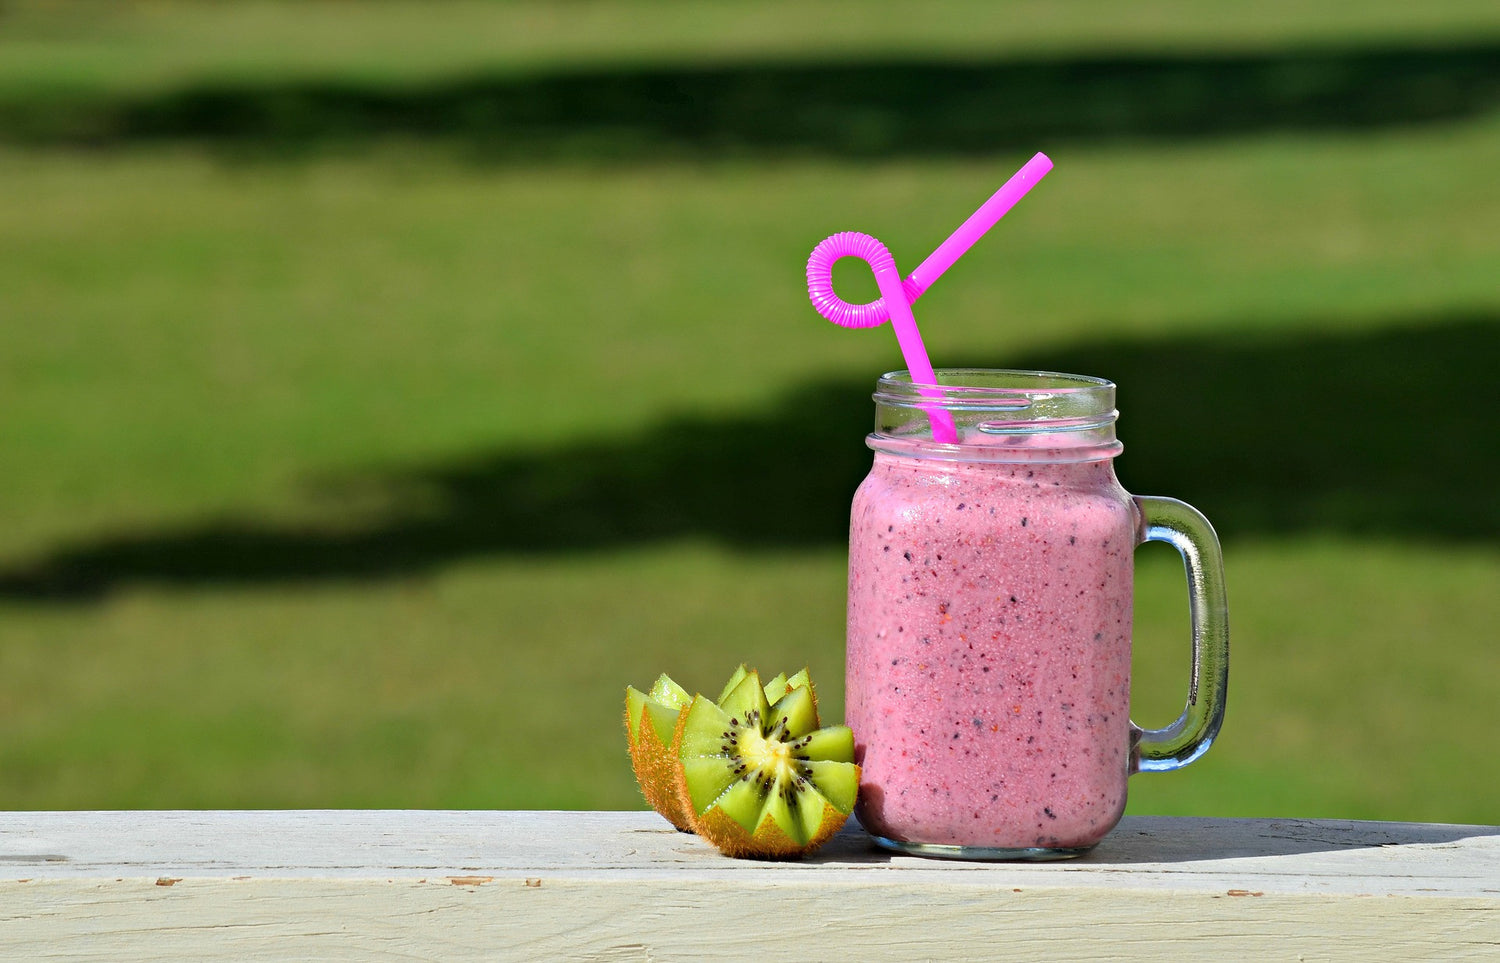 5 kefir smoothie recipes to make your gut happy!